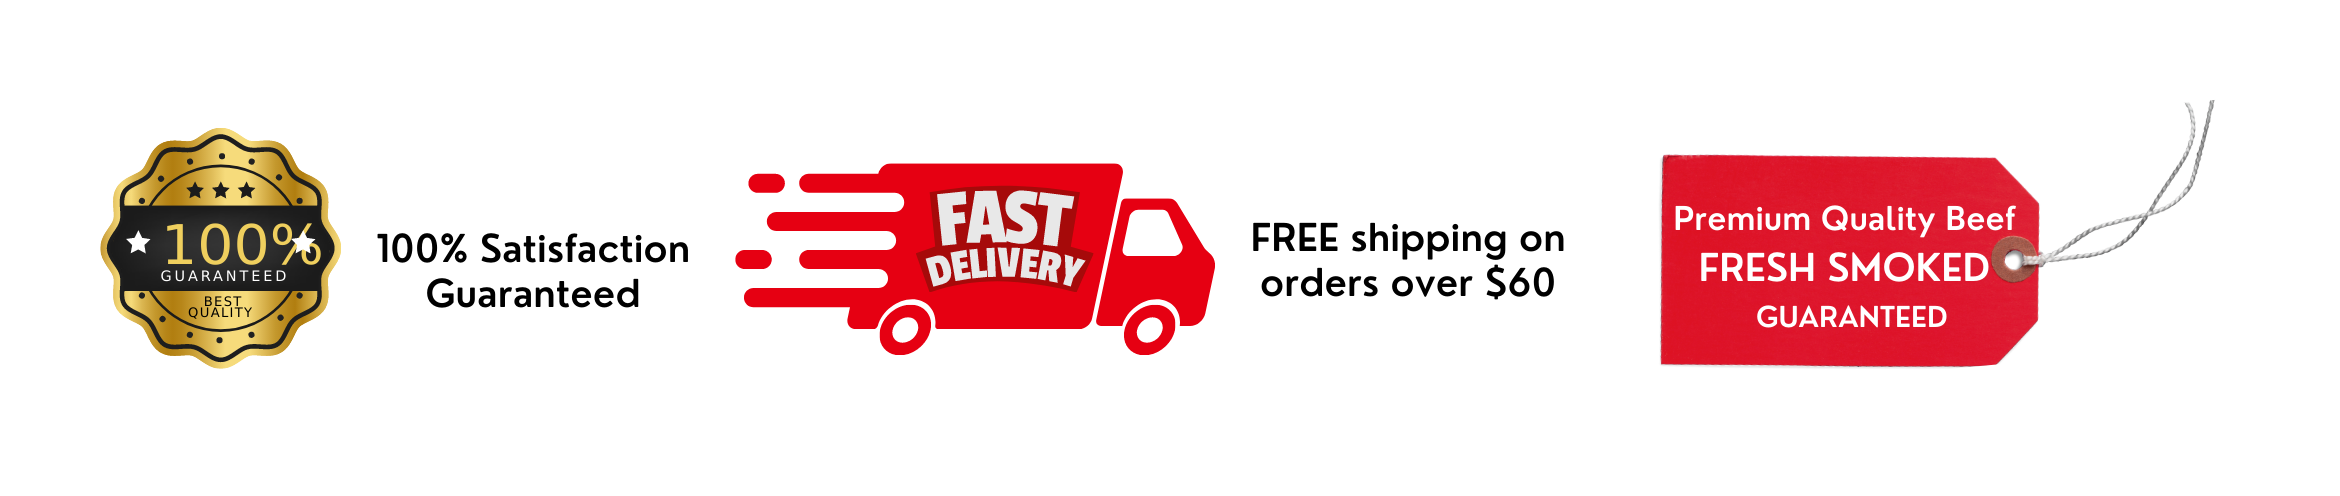 satisfaction , free shipping over $60 and fresh smoked